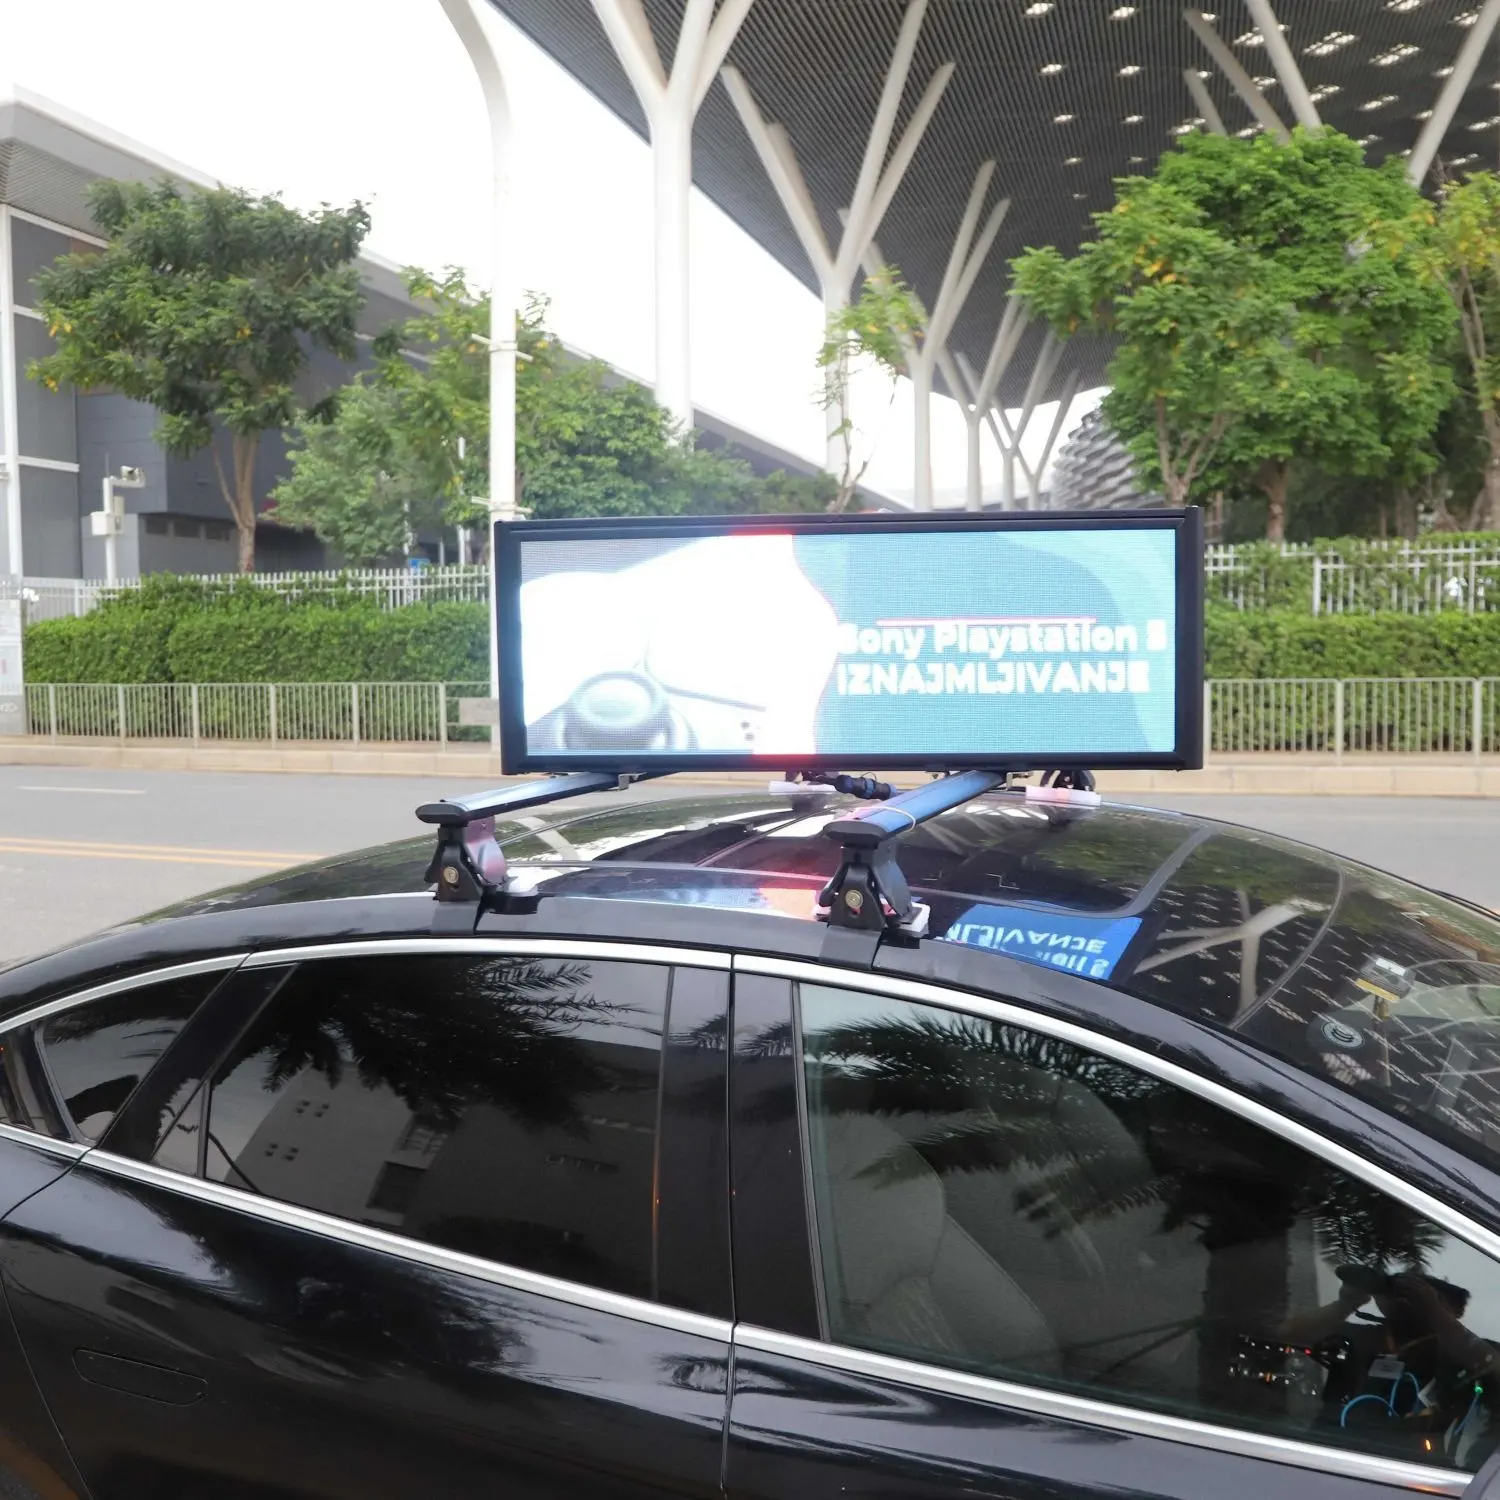 Taxi top led display Three sides display HD full color Energy saving car top advertising signs YAHAM taxi top sign 7.0